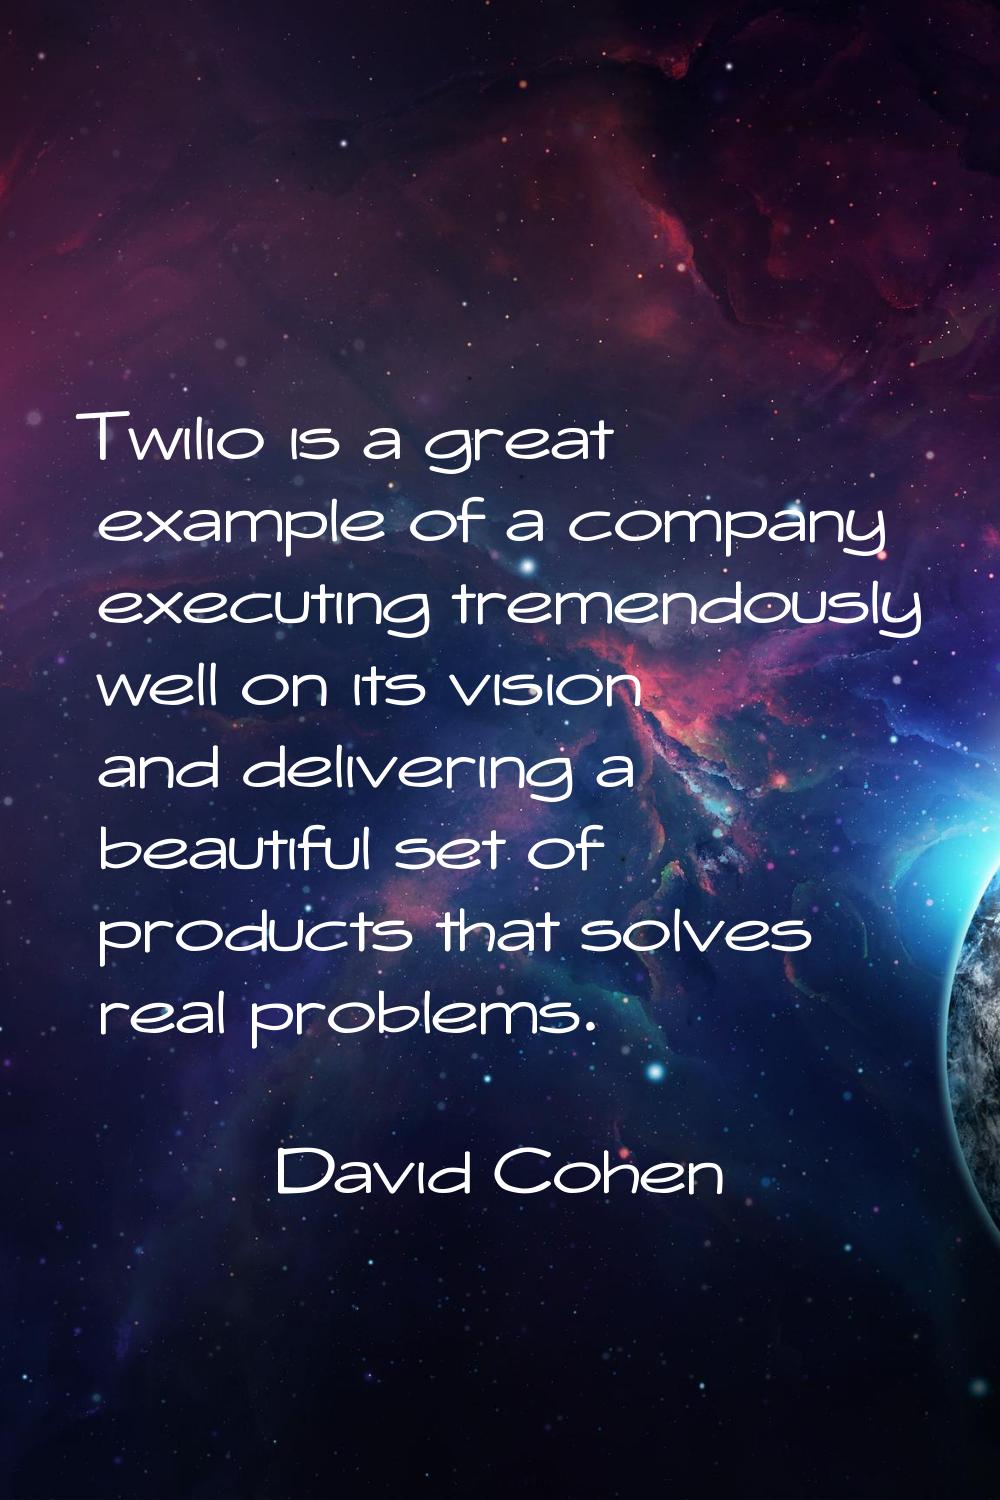 Twilio is a great example of a company executing tremendously well on its vision and delivering a b